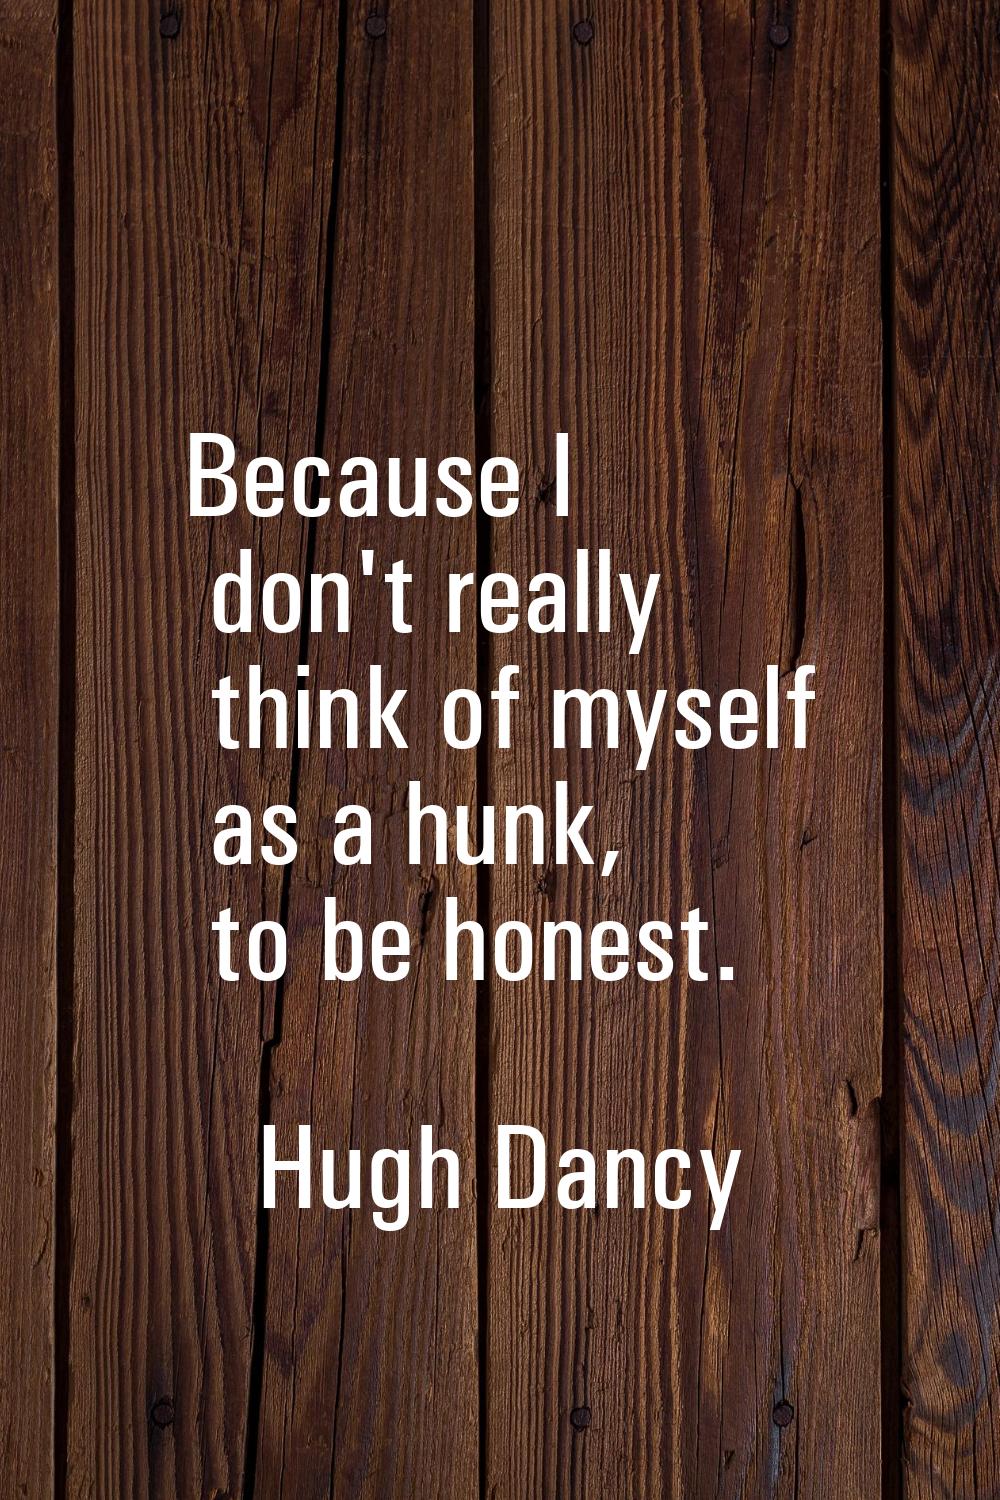 Because I don't really think of myself as a hunk, to be honest.